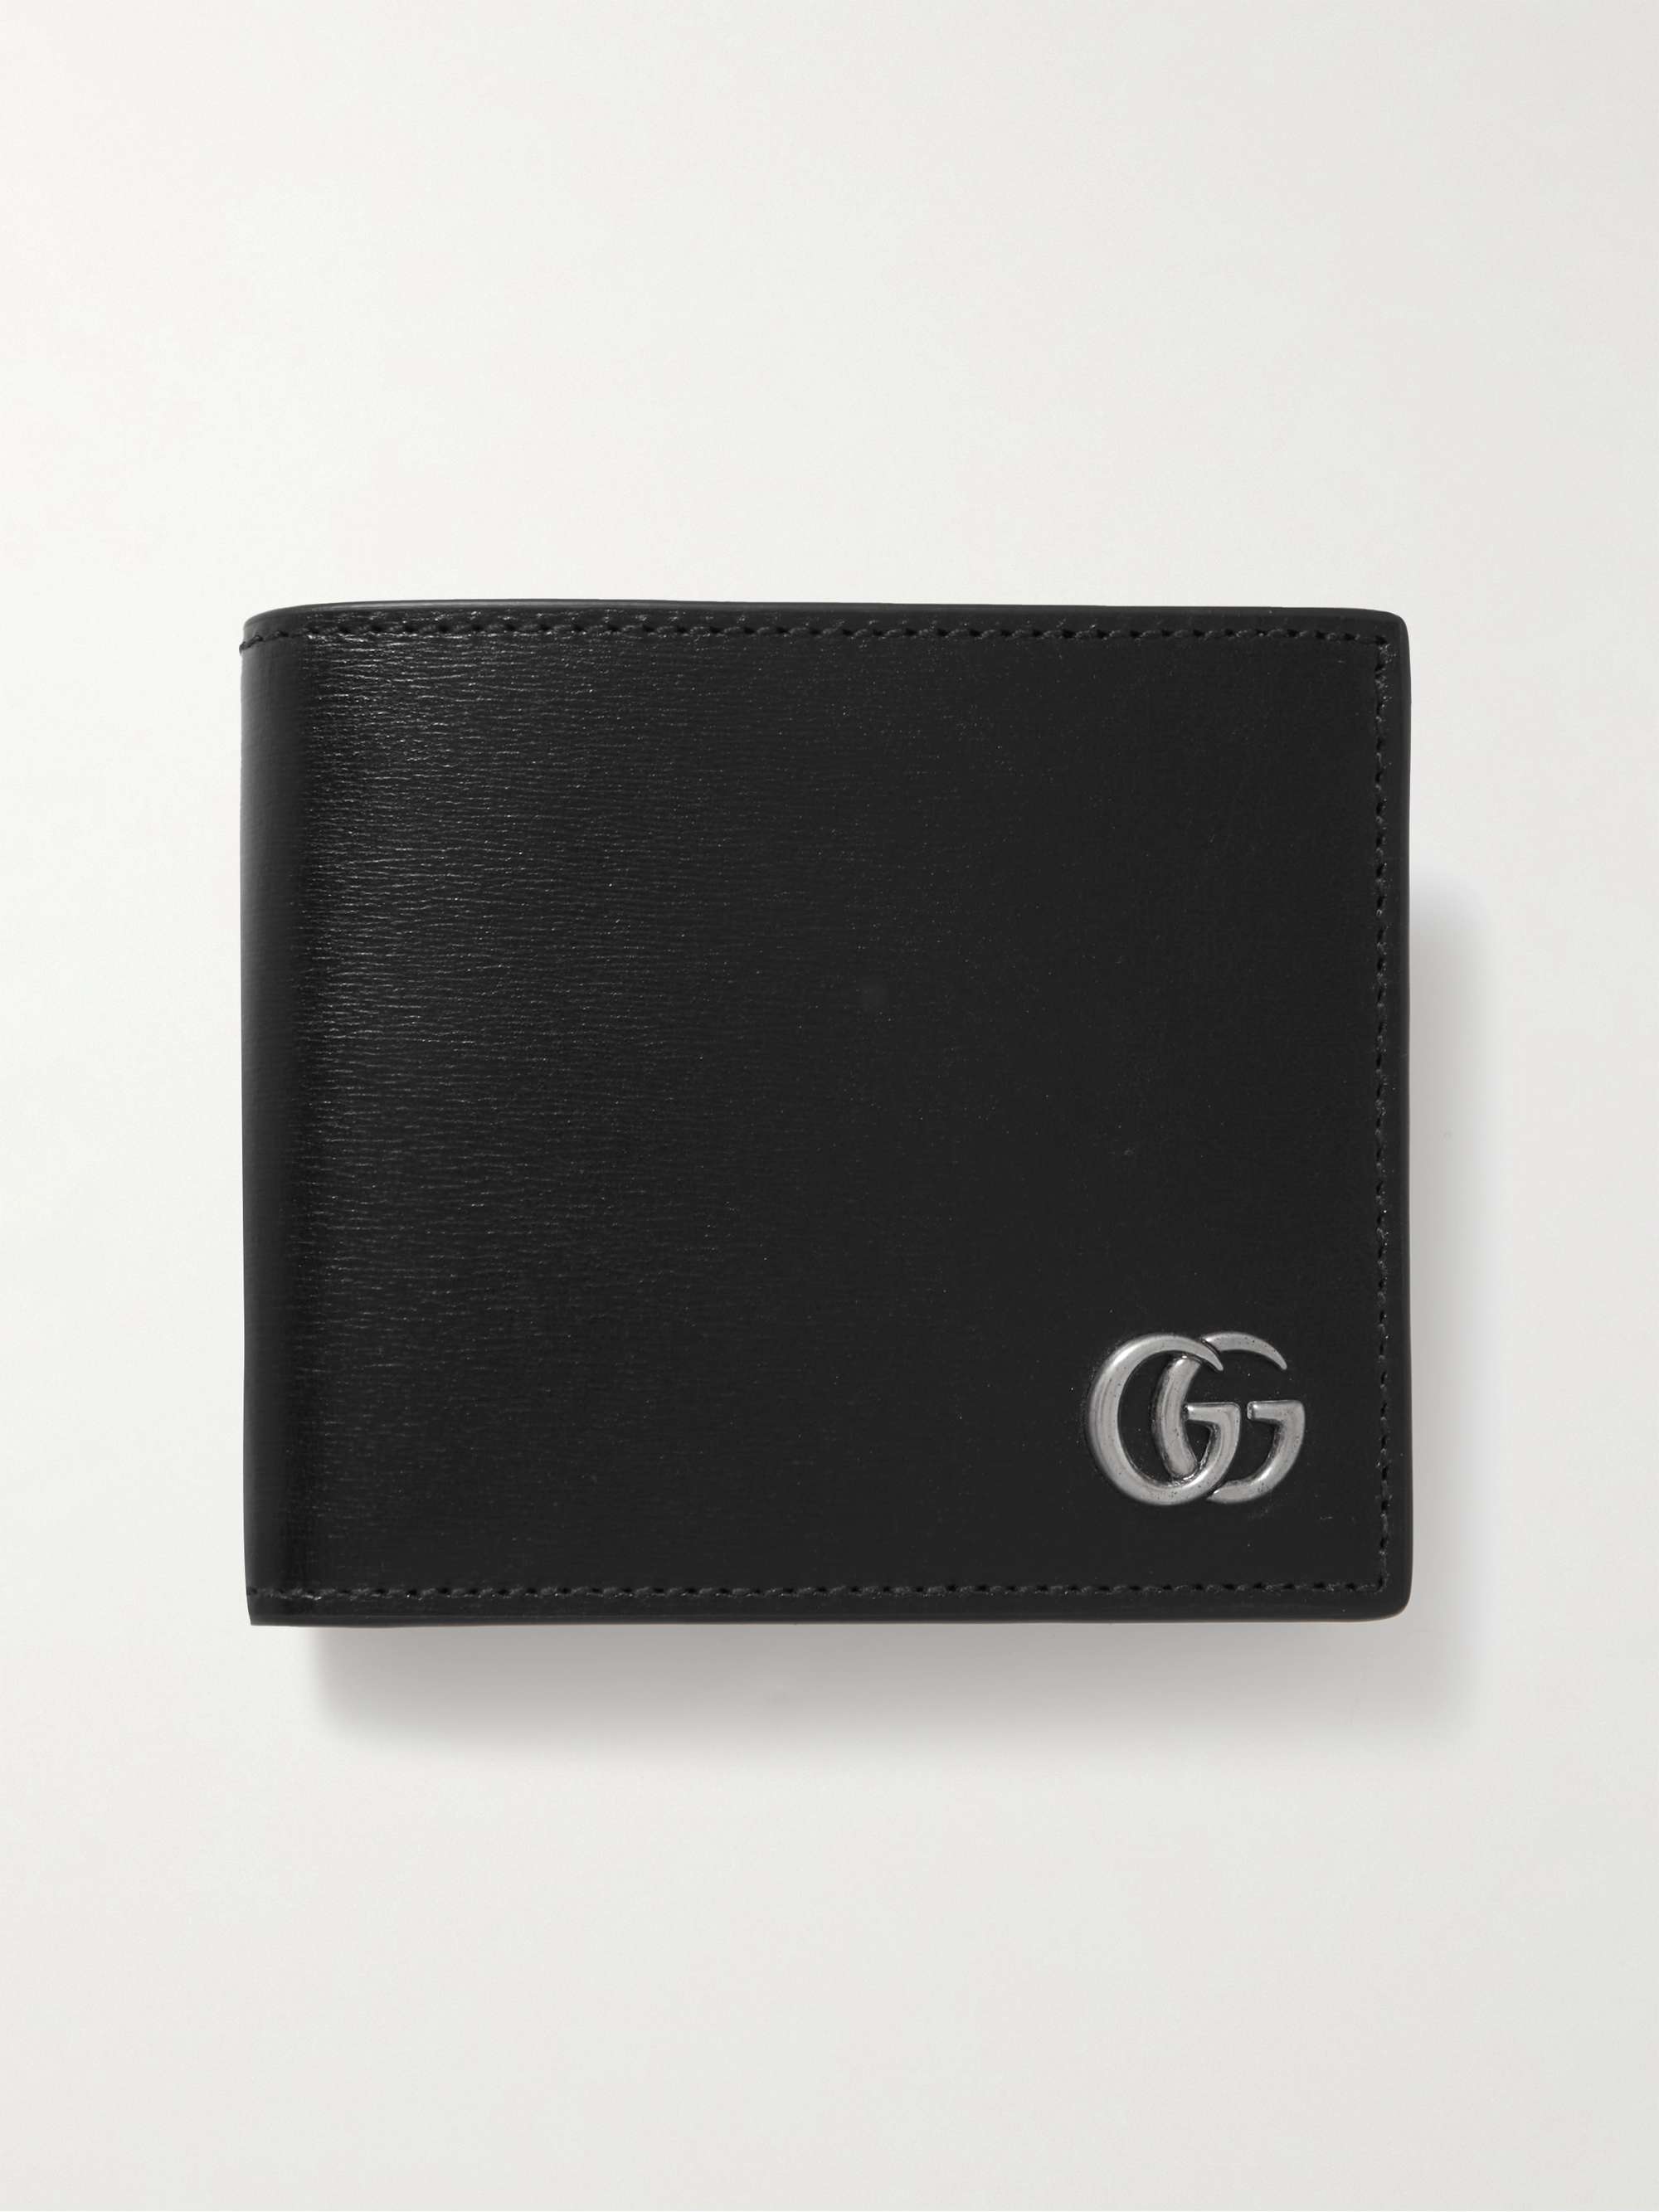 GUCCI GG Marmont Leather Billfold Wallet for Men